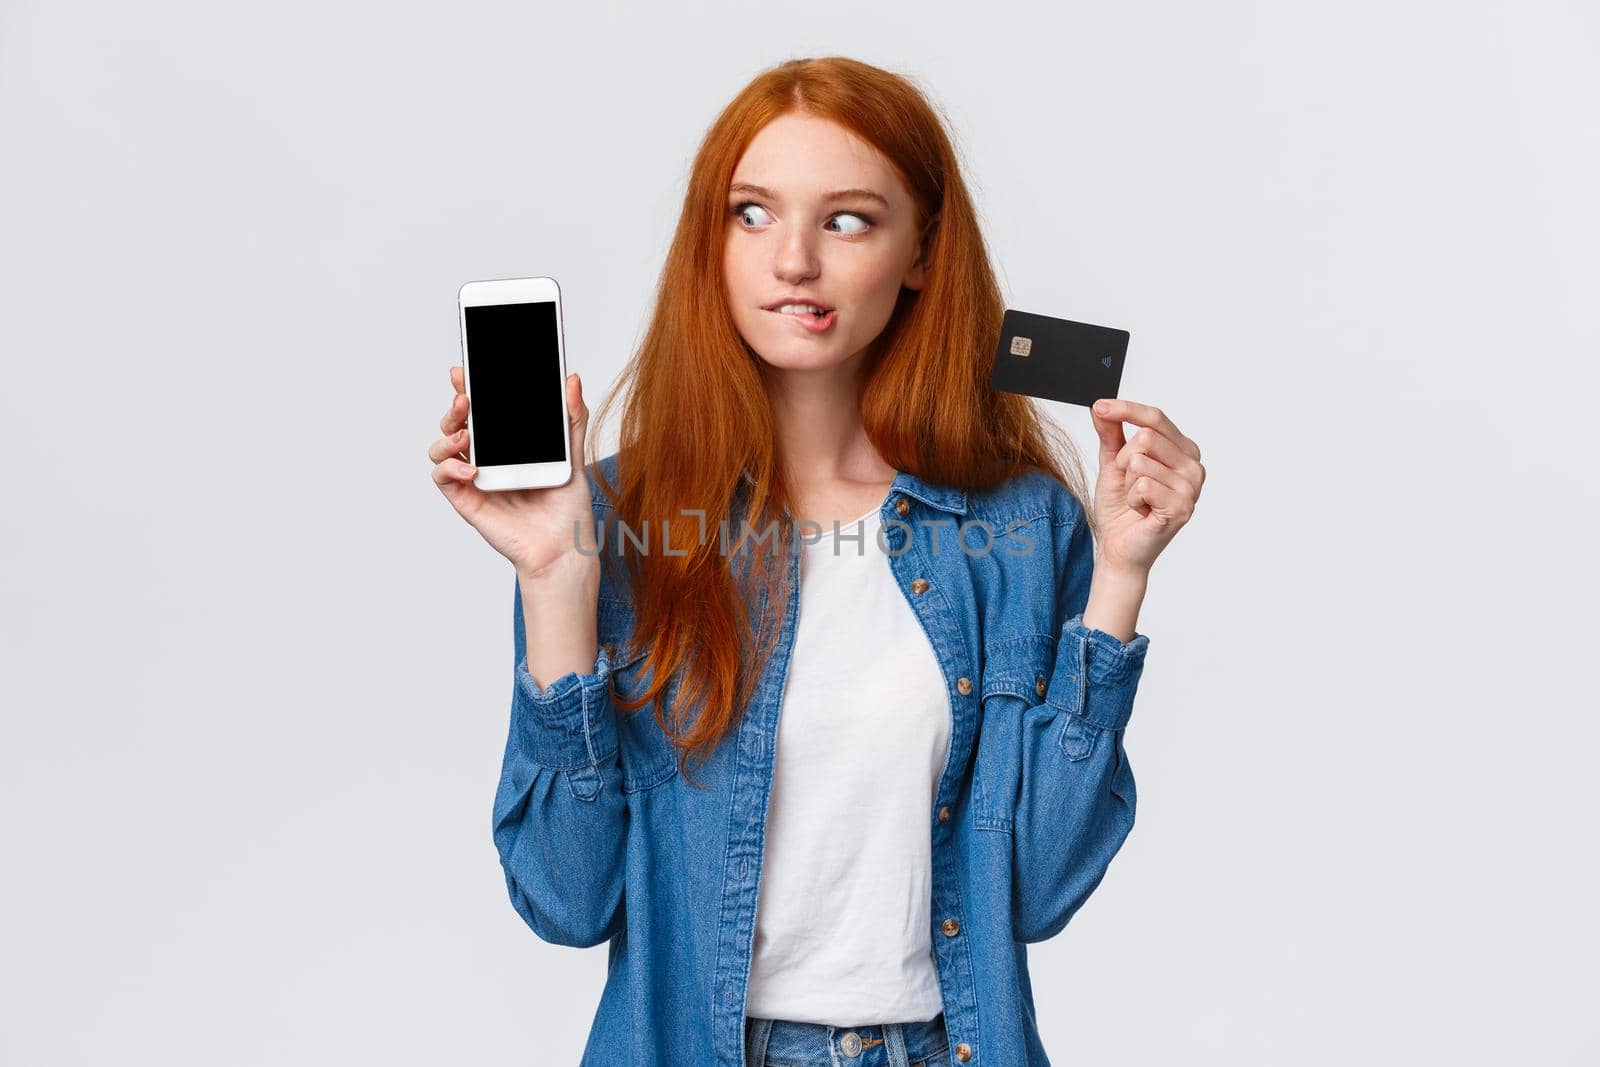 Girl consider buy thing with super good discount. Temped and wishful excited redhead female shopaholic looking at smartphone, shopping mobile app, holding credit card, bite lip eager purchase.